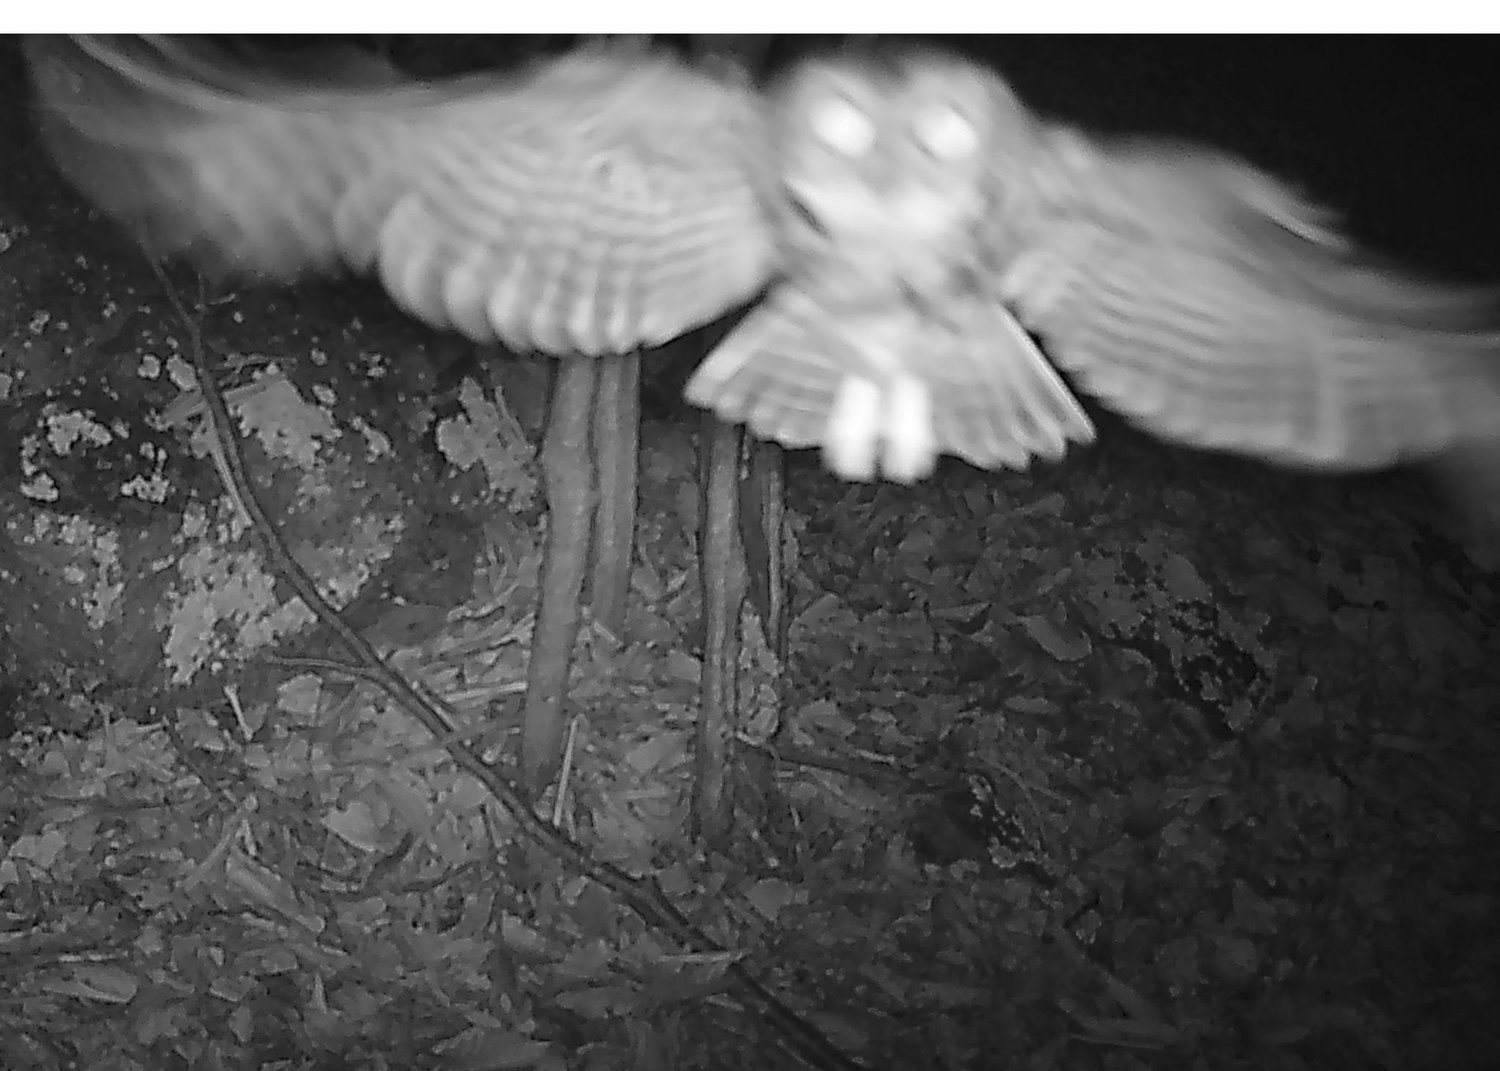 A saw-whet owl flying nearby triggered this self-portrait. In this image, the owl is too close for a good focus. It may have seen the trail cam or the illuminator and decided to check it out. Saw-whets are the smallest owl in our region, even smaller than the screech owl.